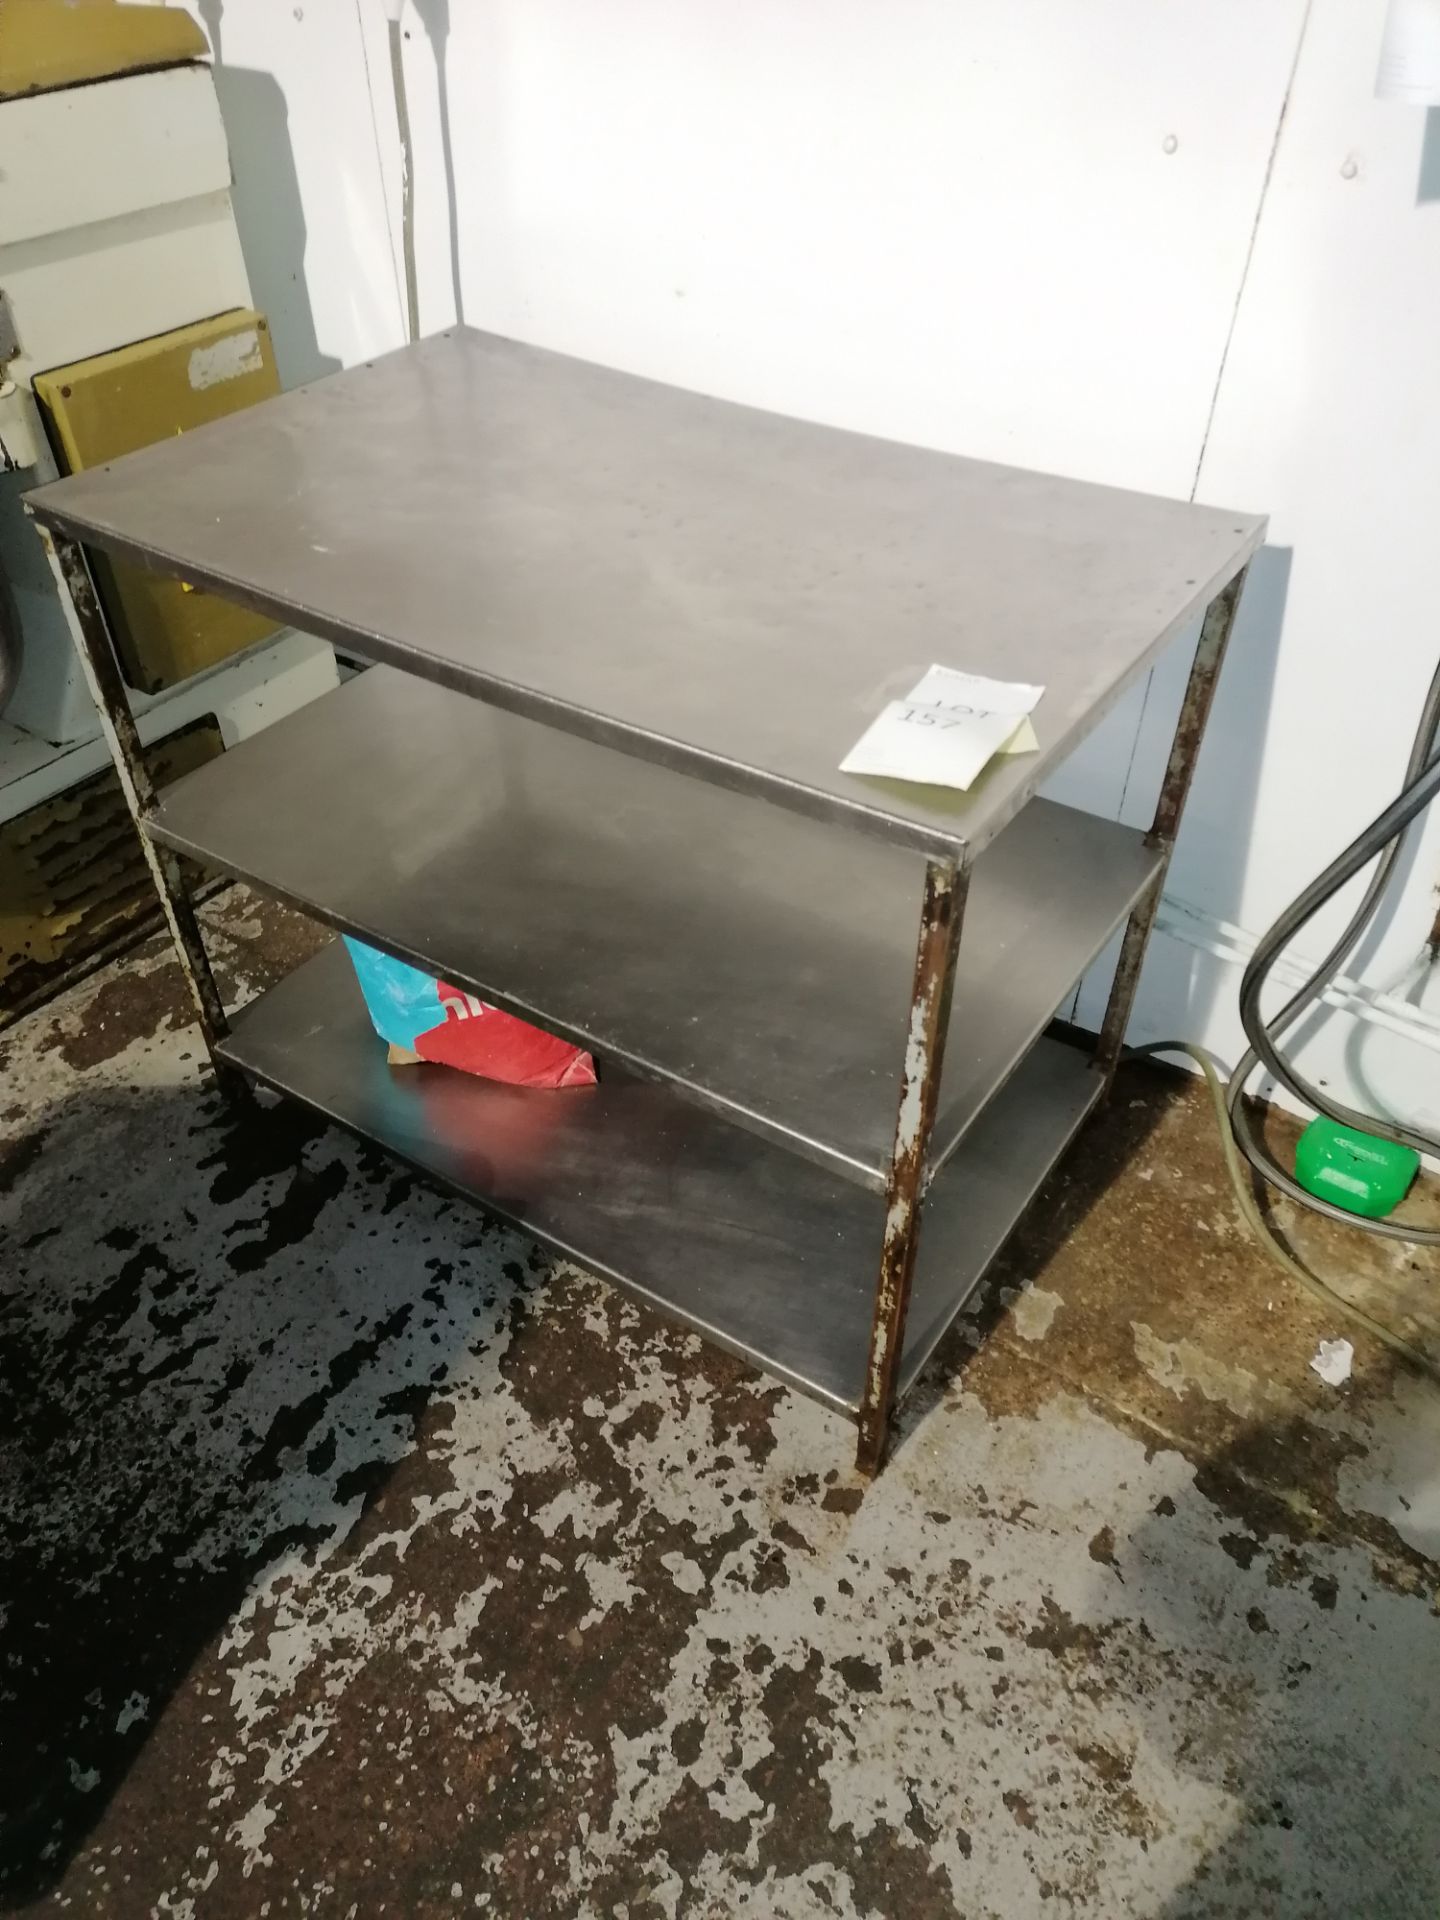 Stainless Steel Preperation Table With Steel Frame Length 107cm Width 66cm Height 88cm Contents